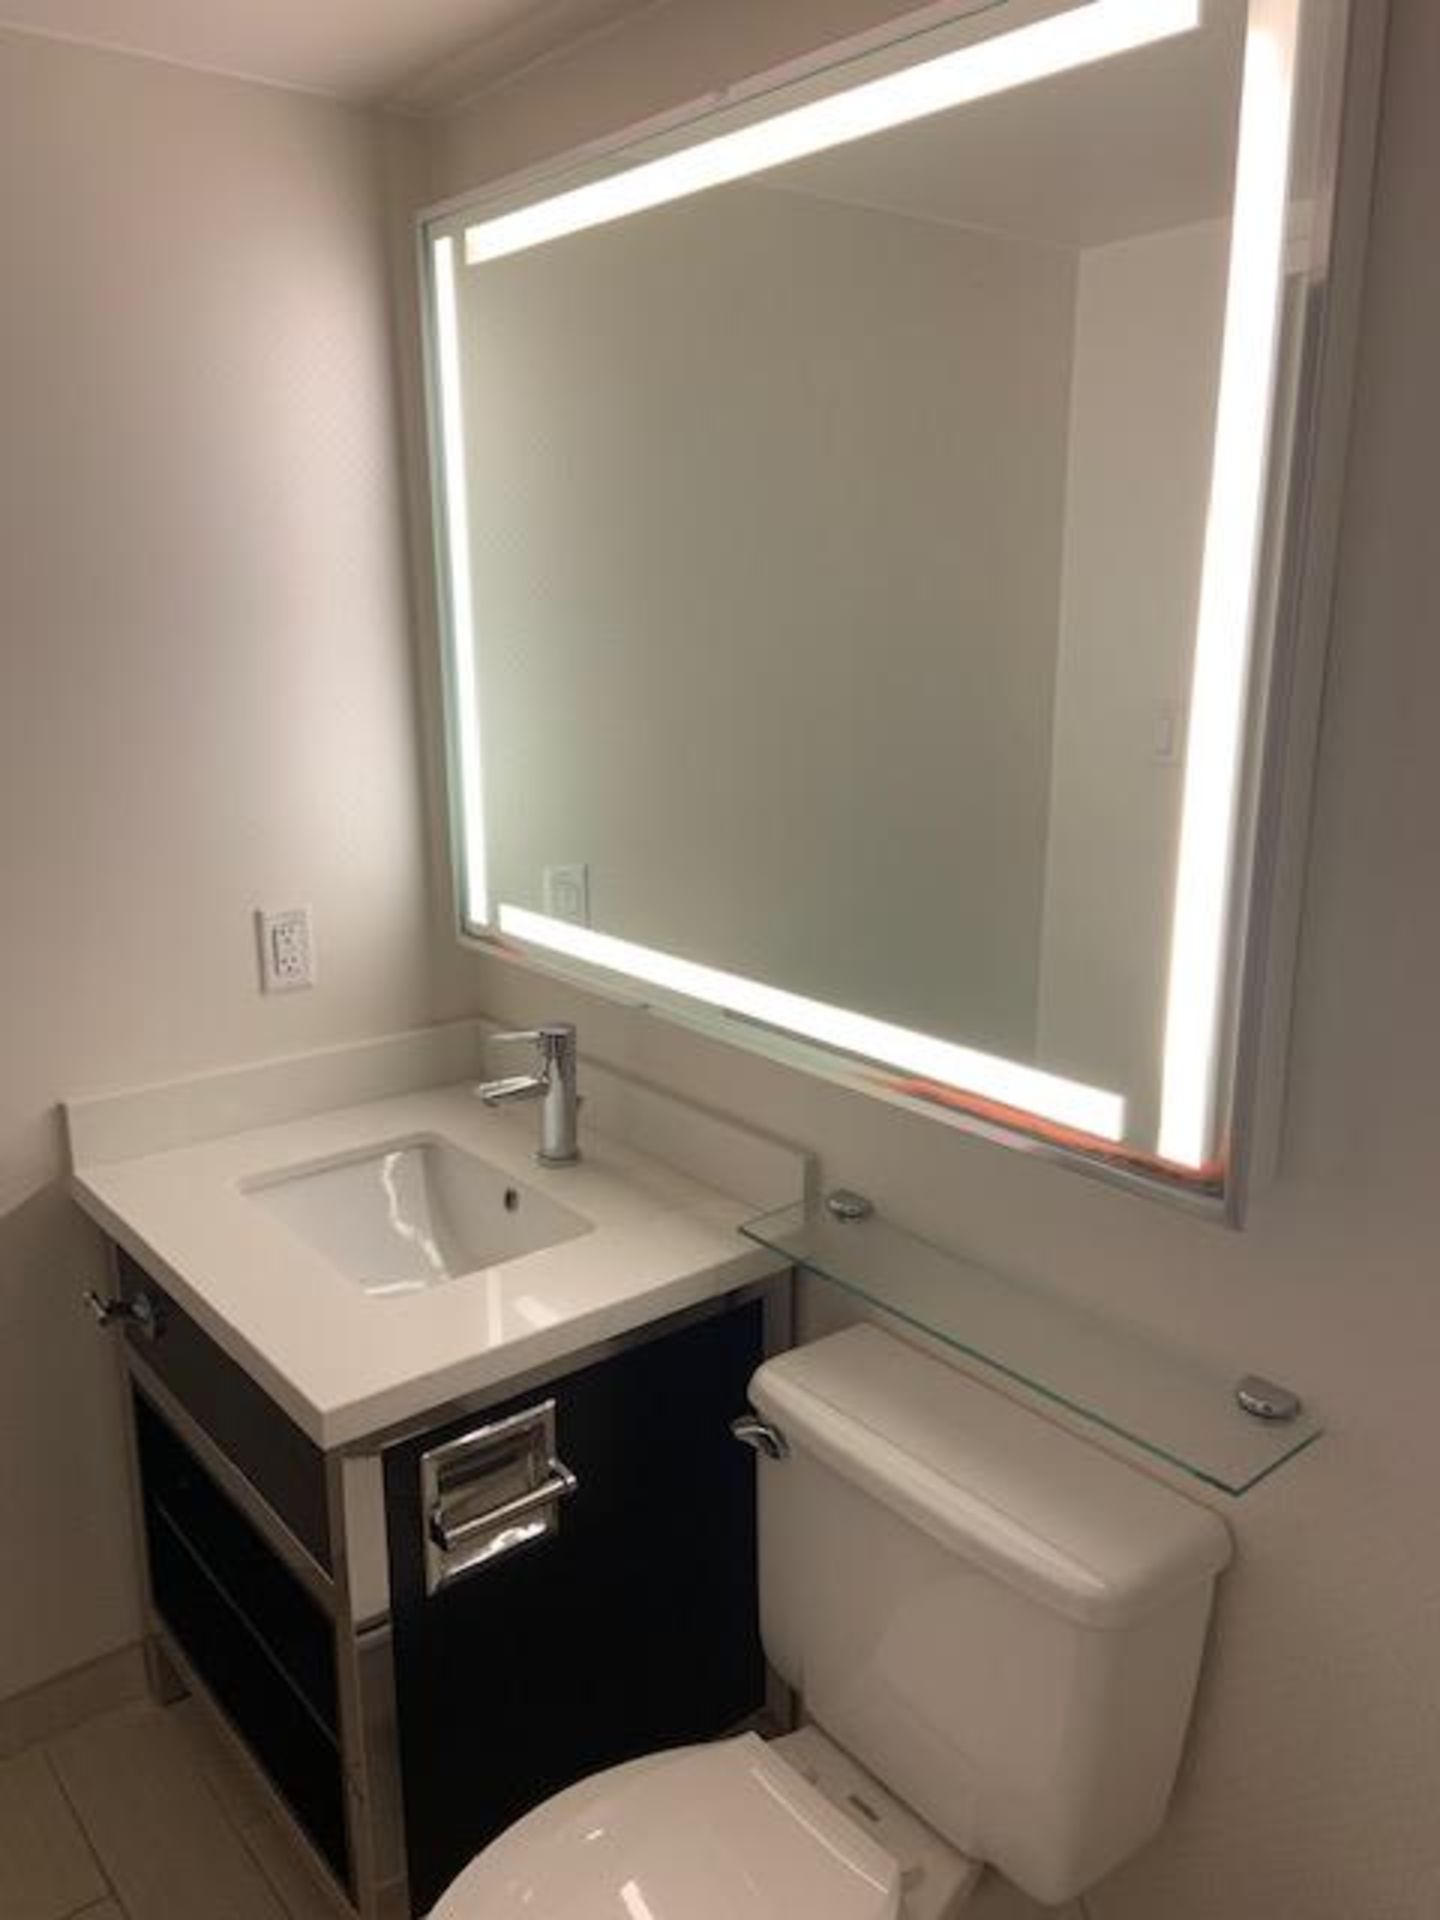 Vanity, Lighted Mirror, Chrome Accessories - NO Shower Head, Mixer or Tub Spout, Location / Room: